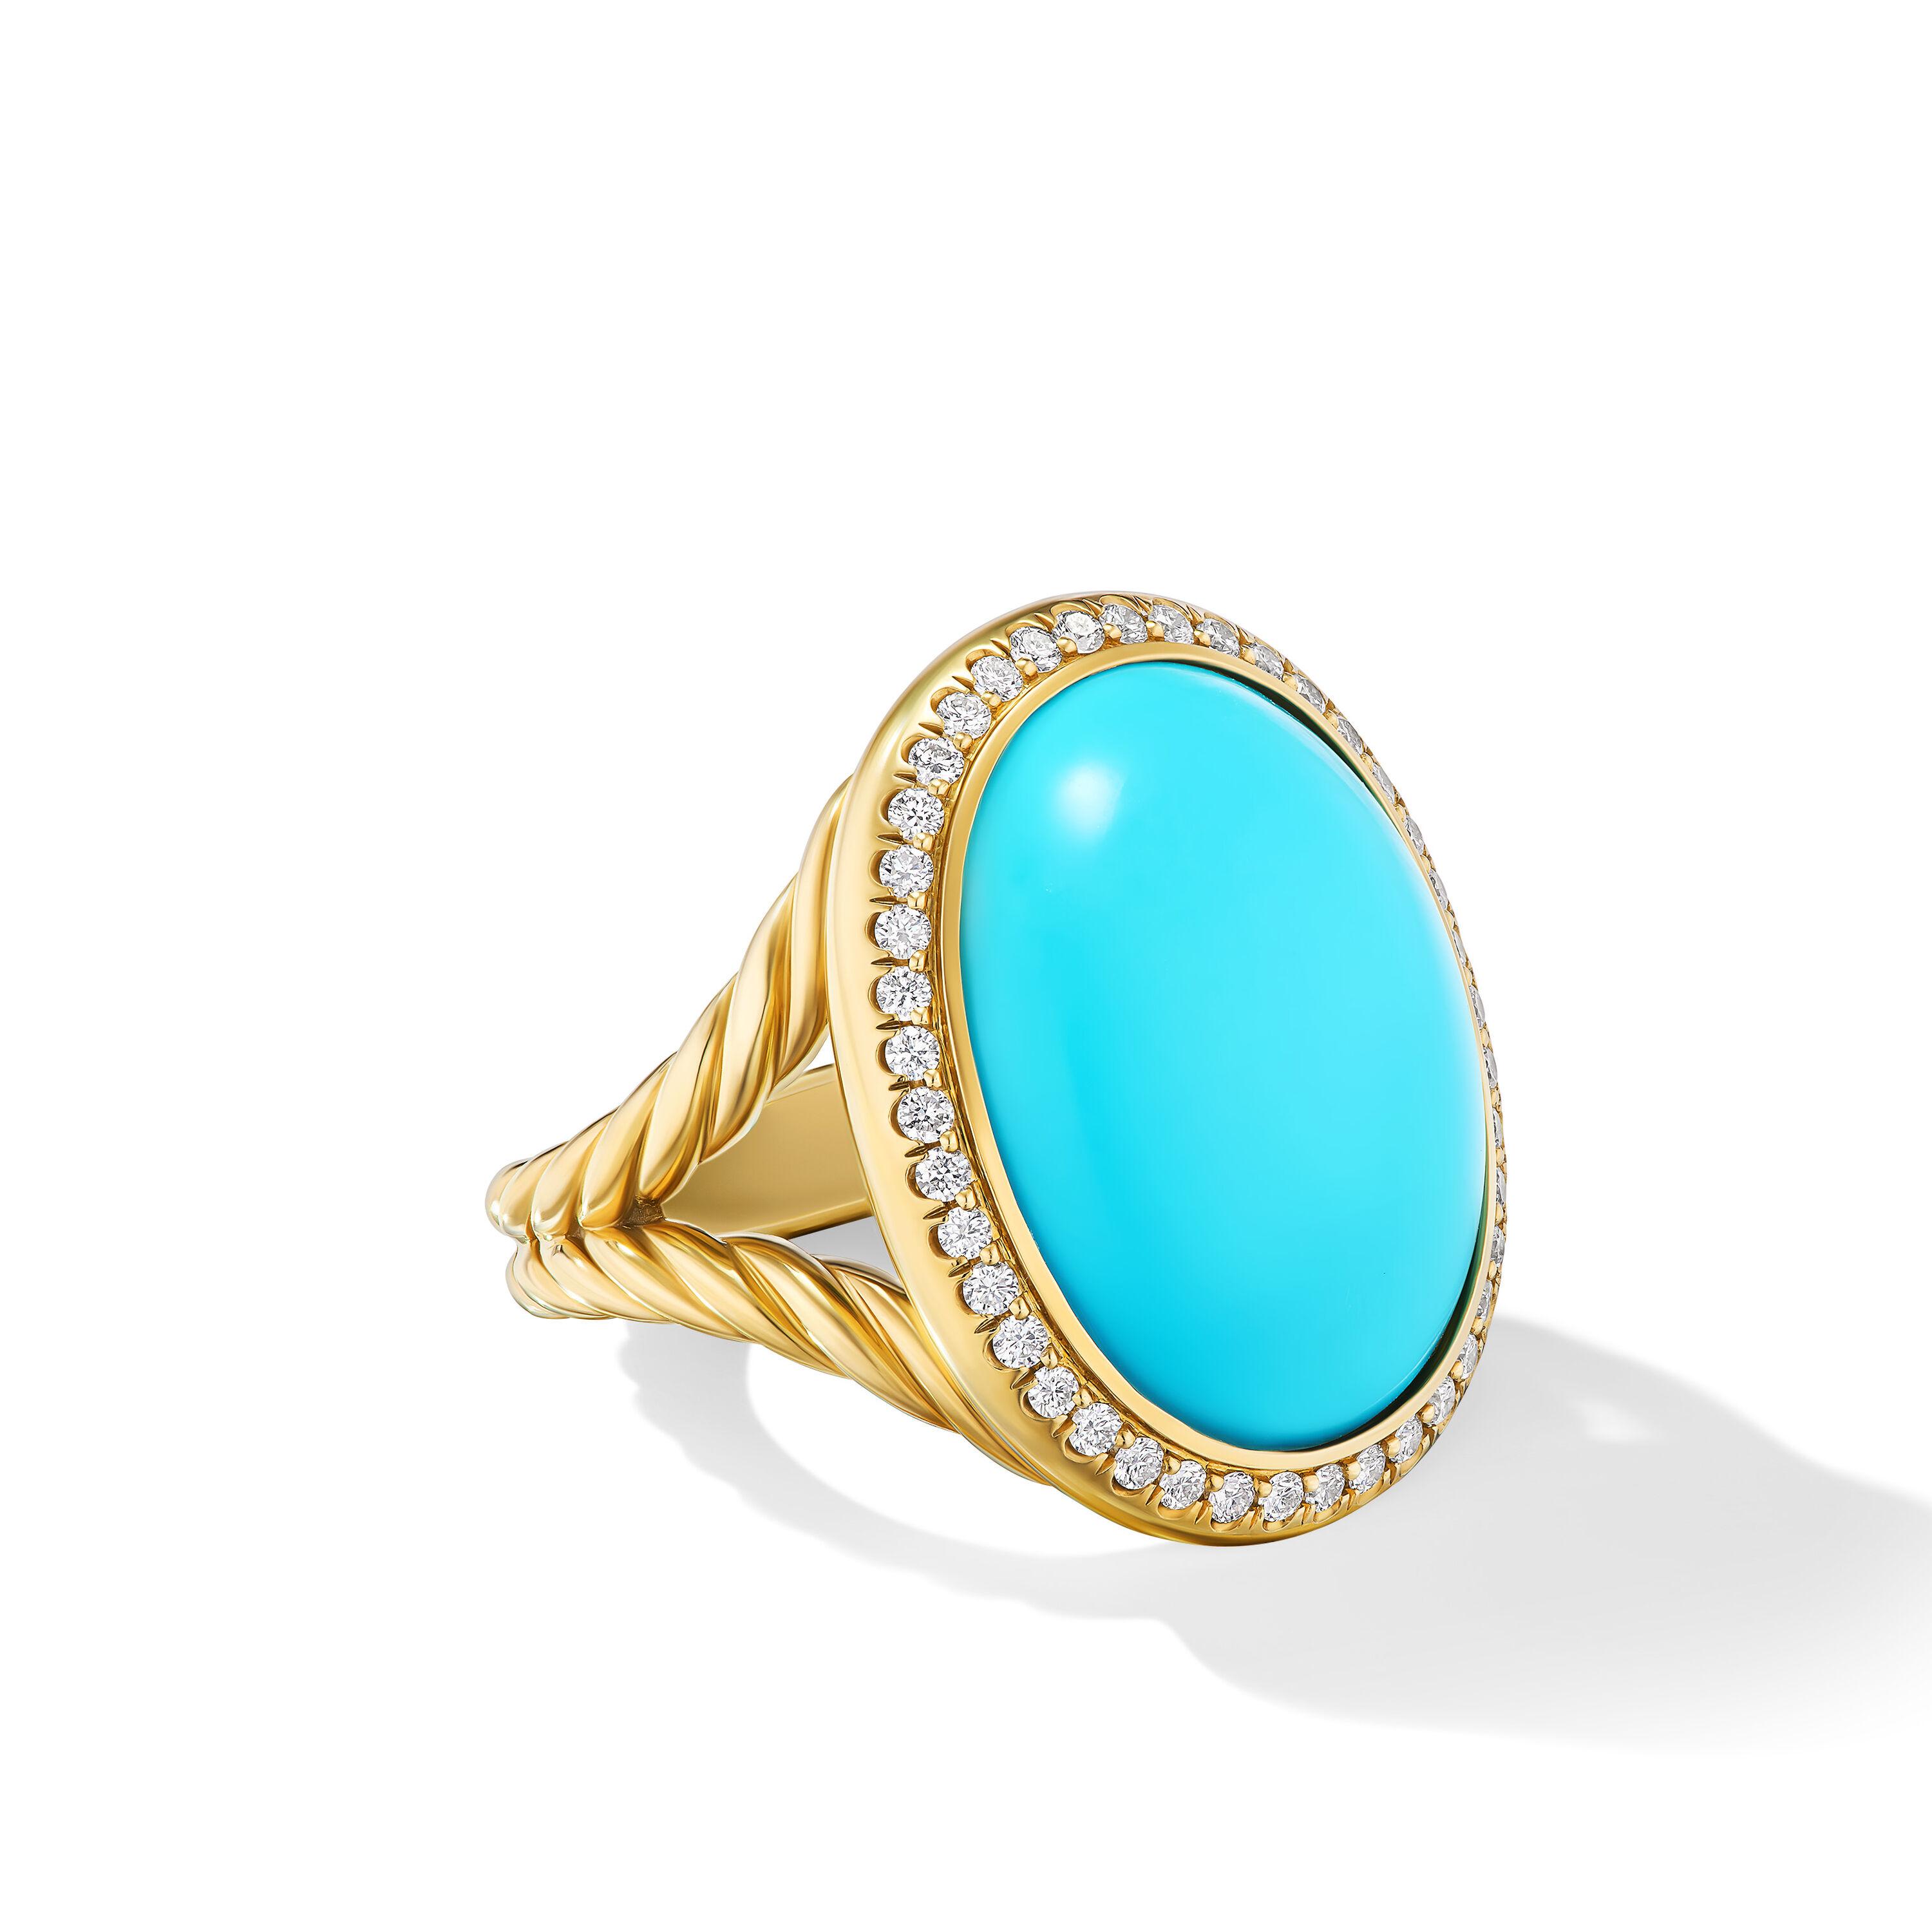 David Yurman Albion Oval Ring in 18K Yellow Gold with Turquoise and Diamonds 0